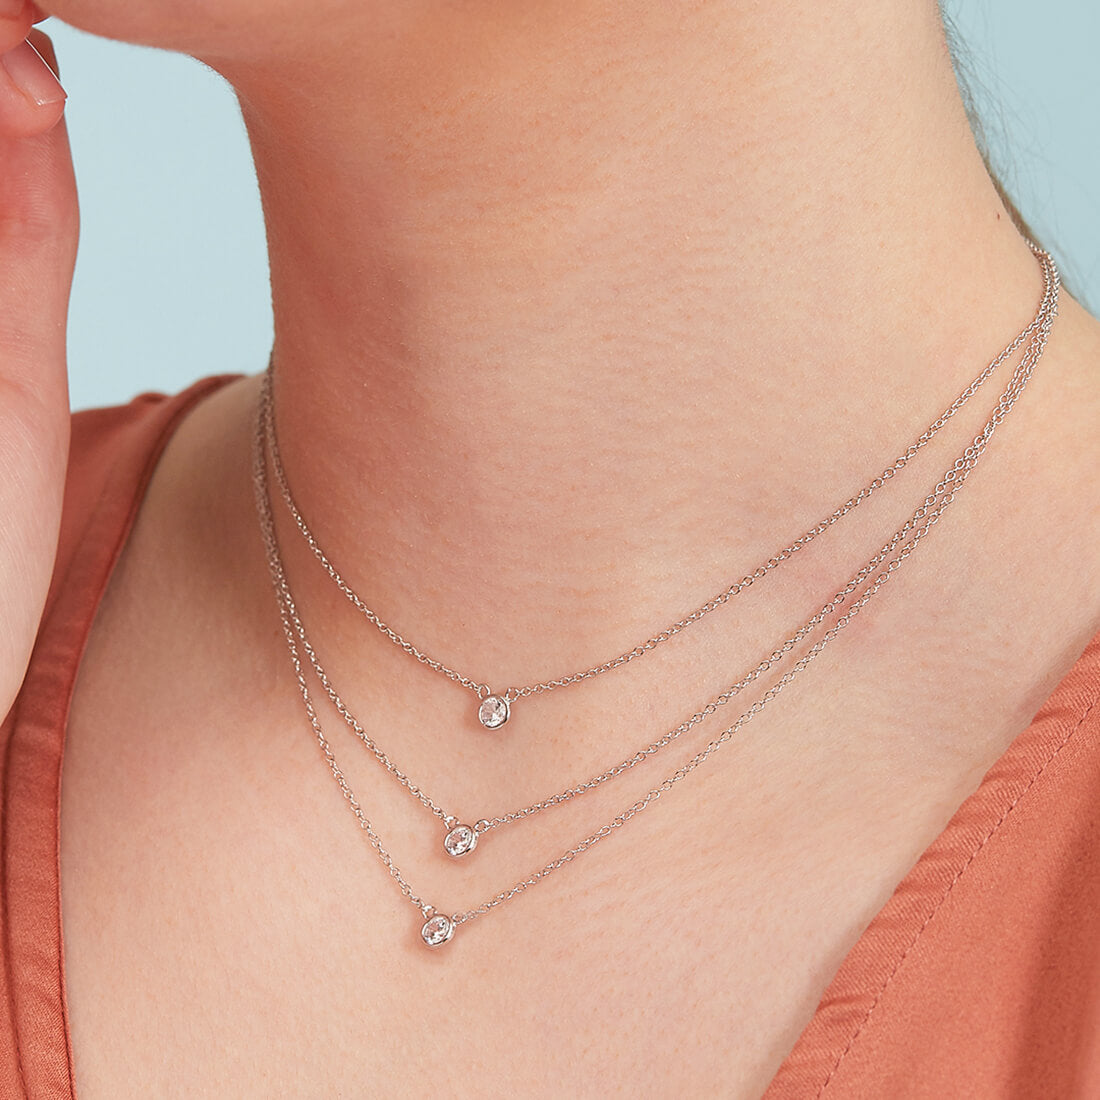 Triple Layered Tiny Charm Drop 925 Silver Necklace